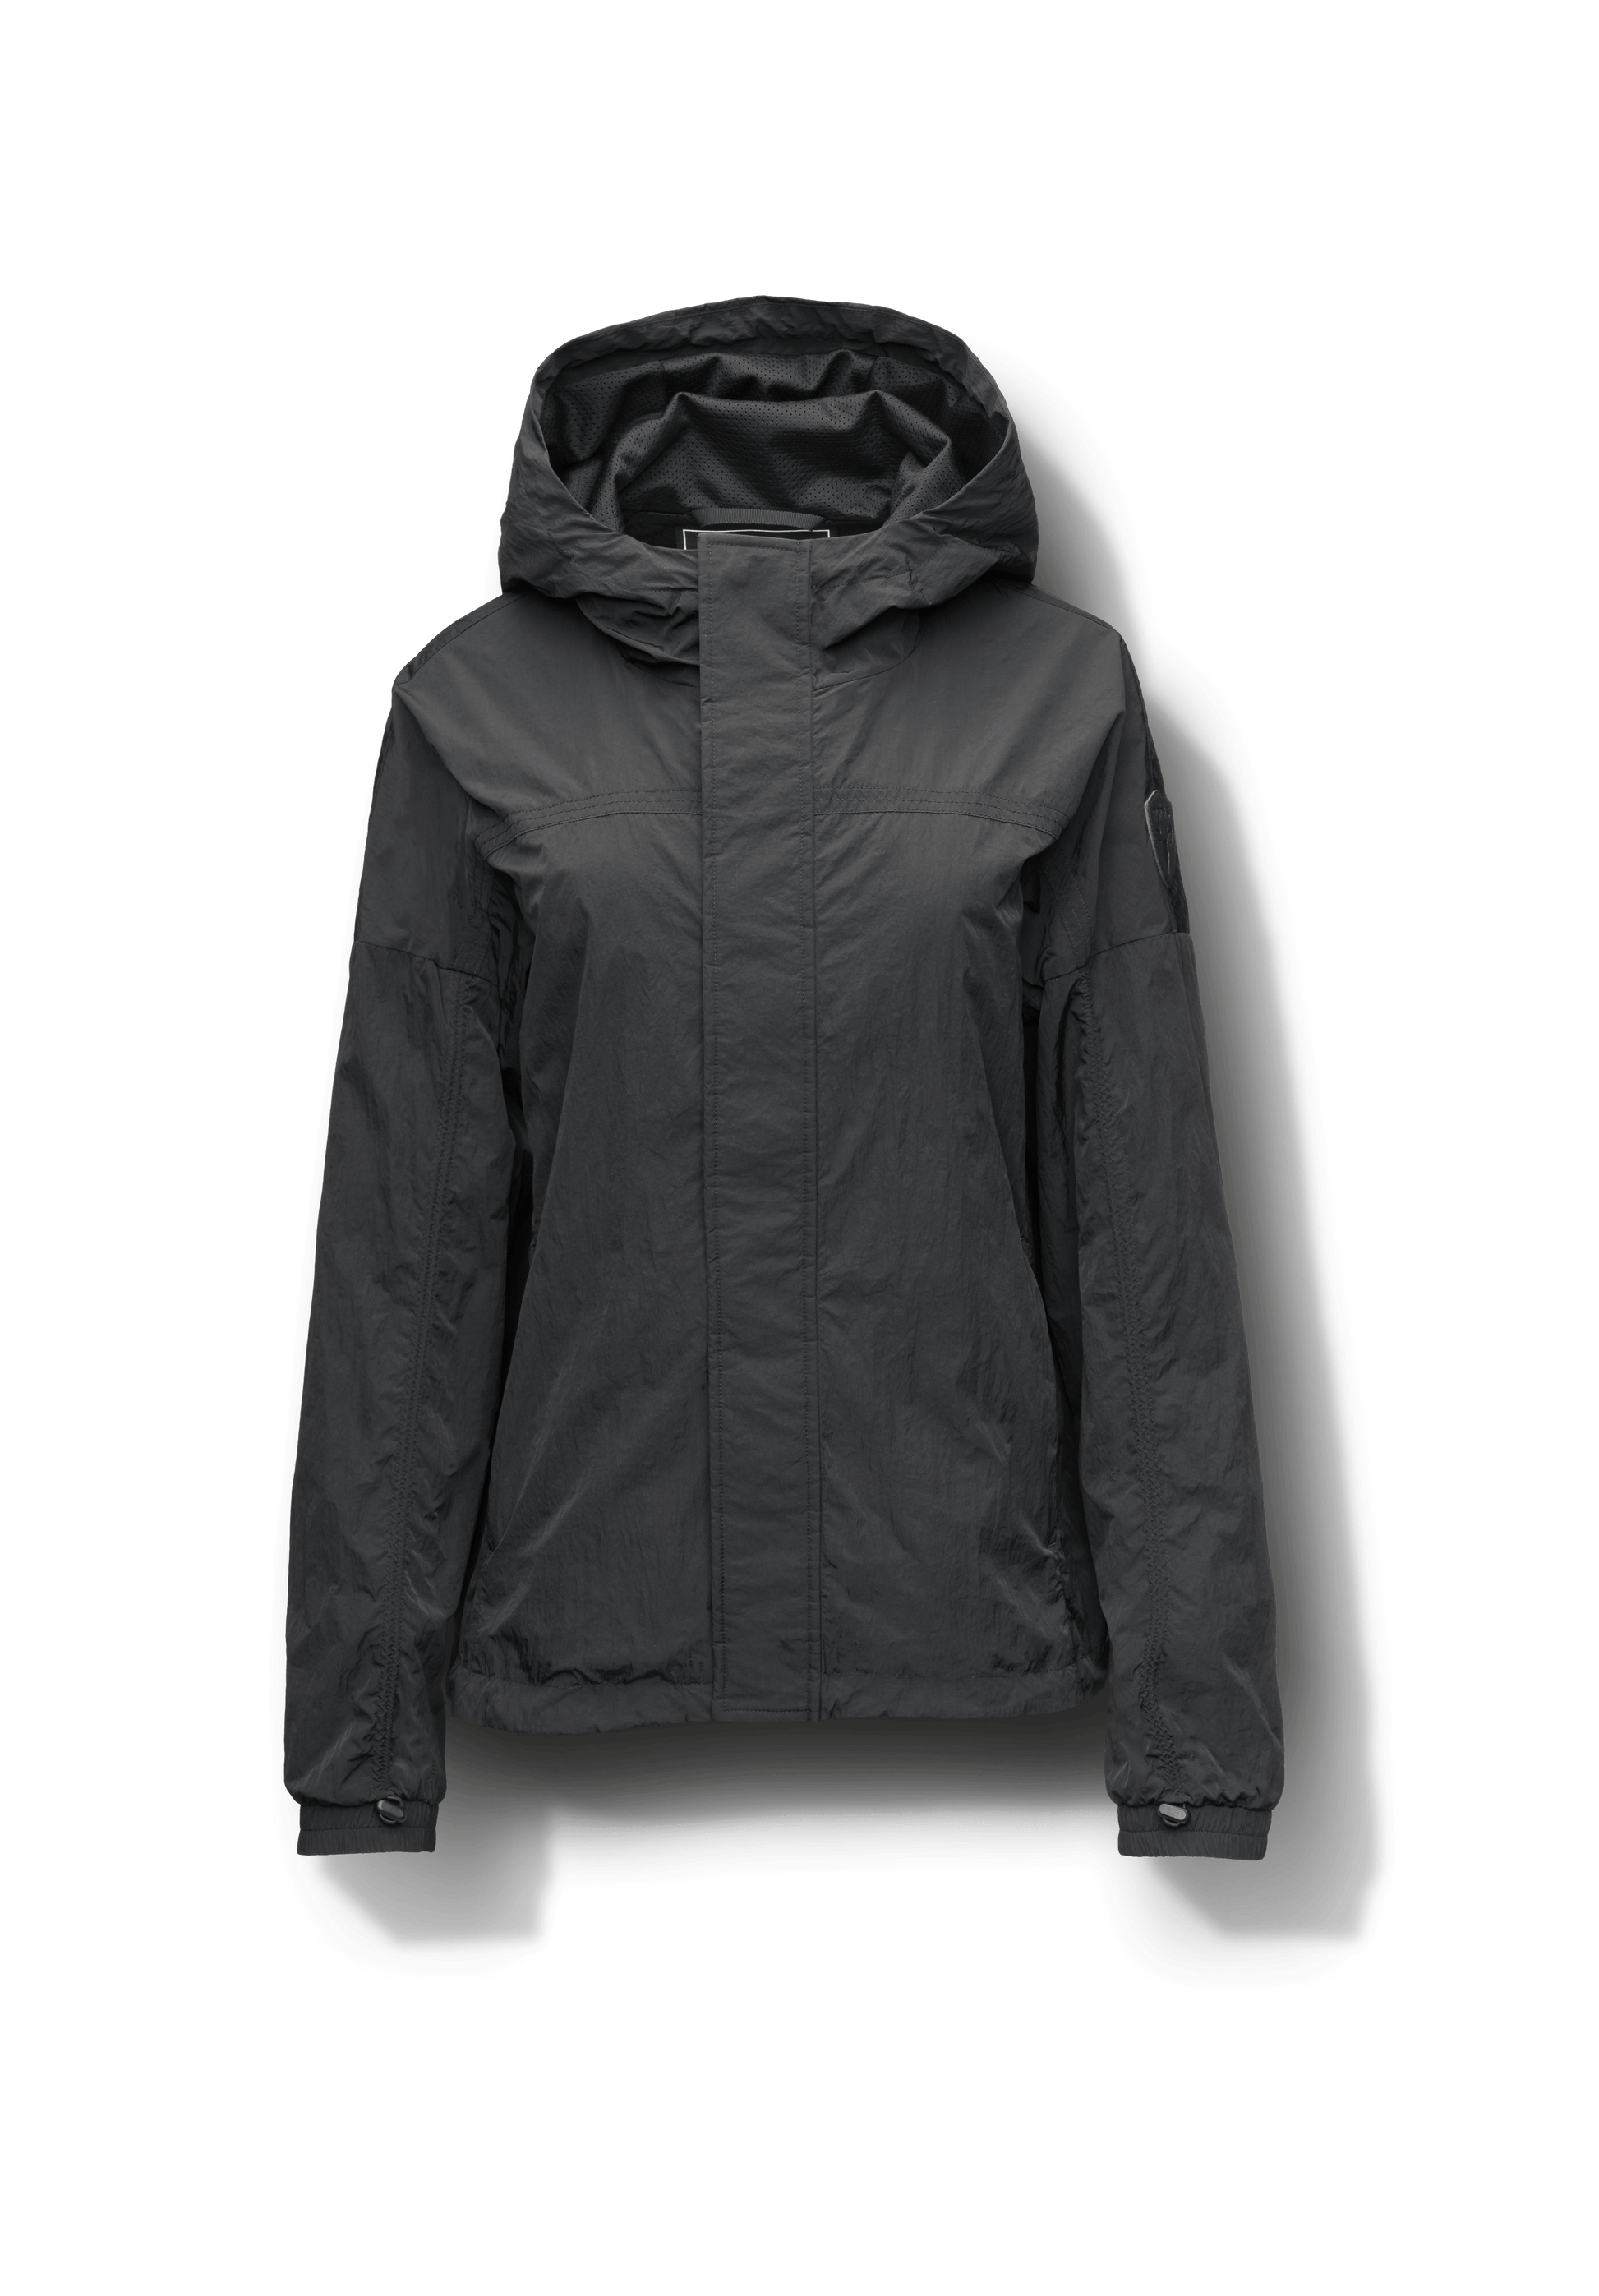 Hartley Women's Tailored Rain Jacket in hip length, two-way centre front zipper with wind flap, toggle adjustable cuffs and waist cord, non-removable hood, side entry waist pockets, in Black